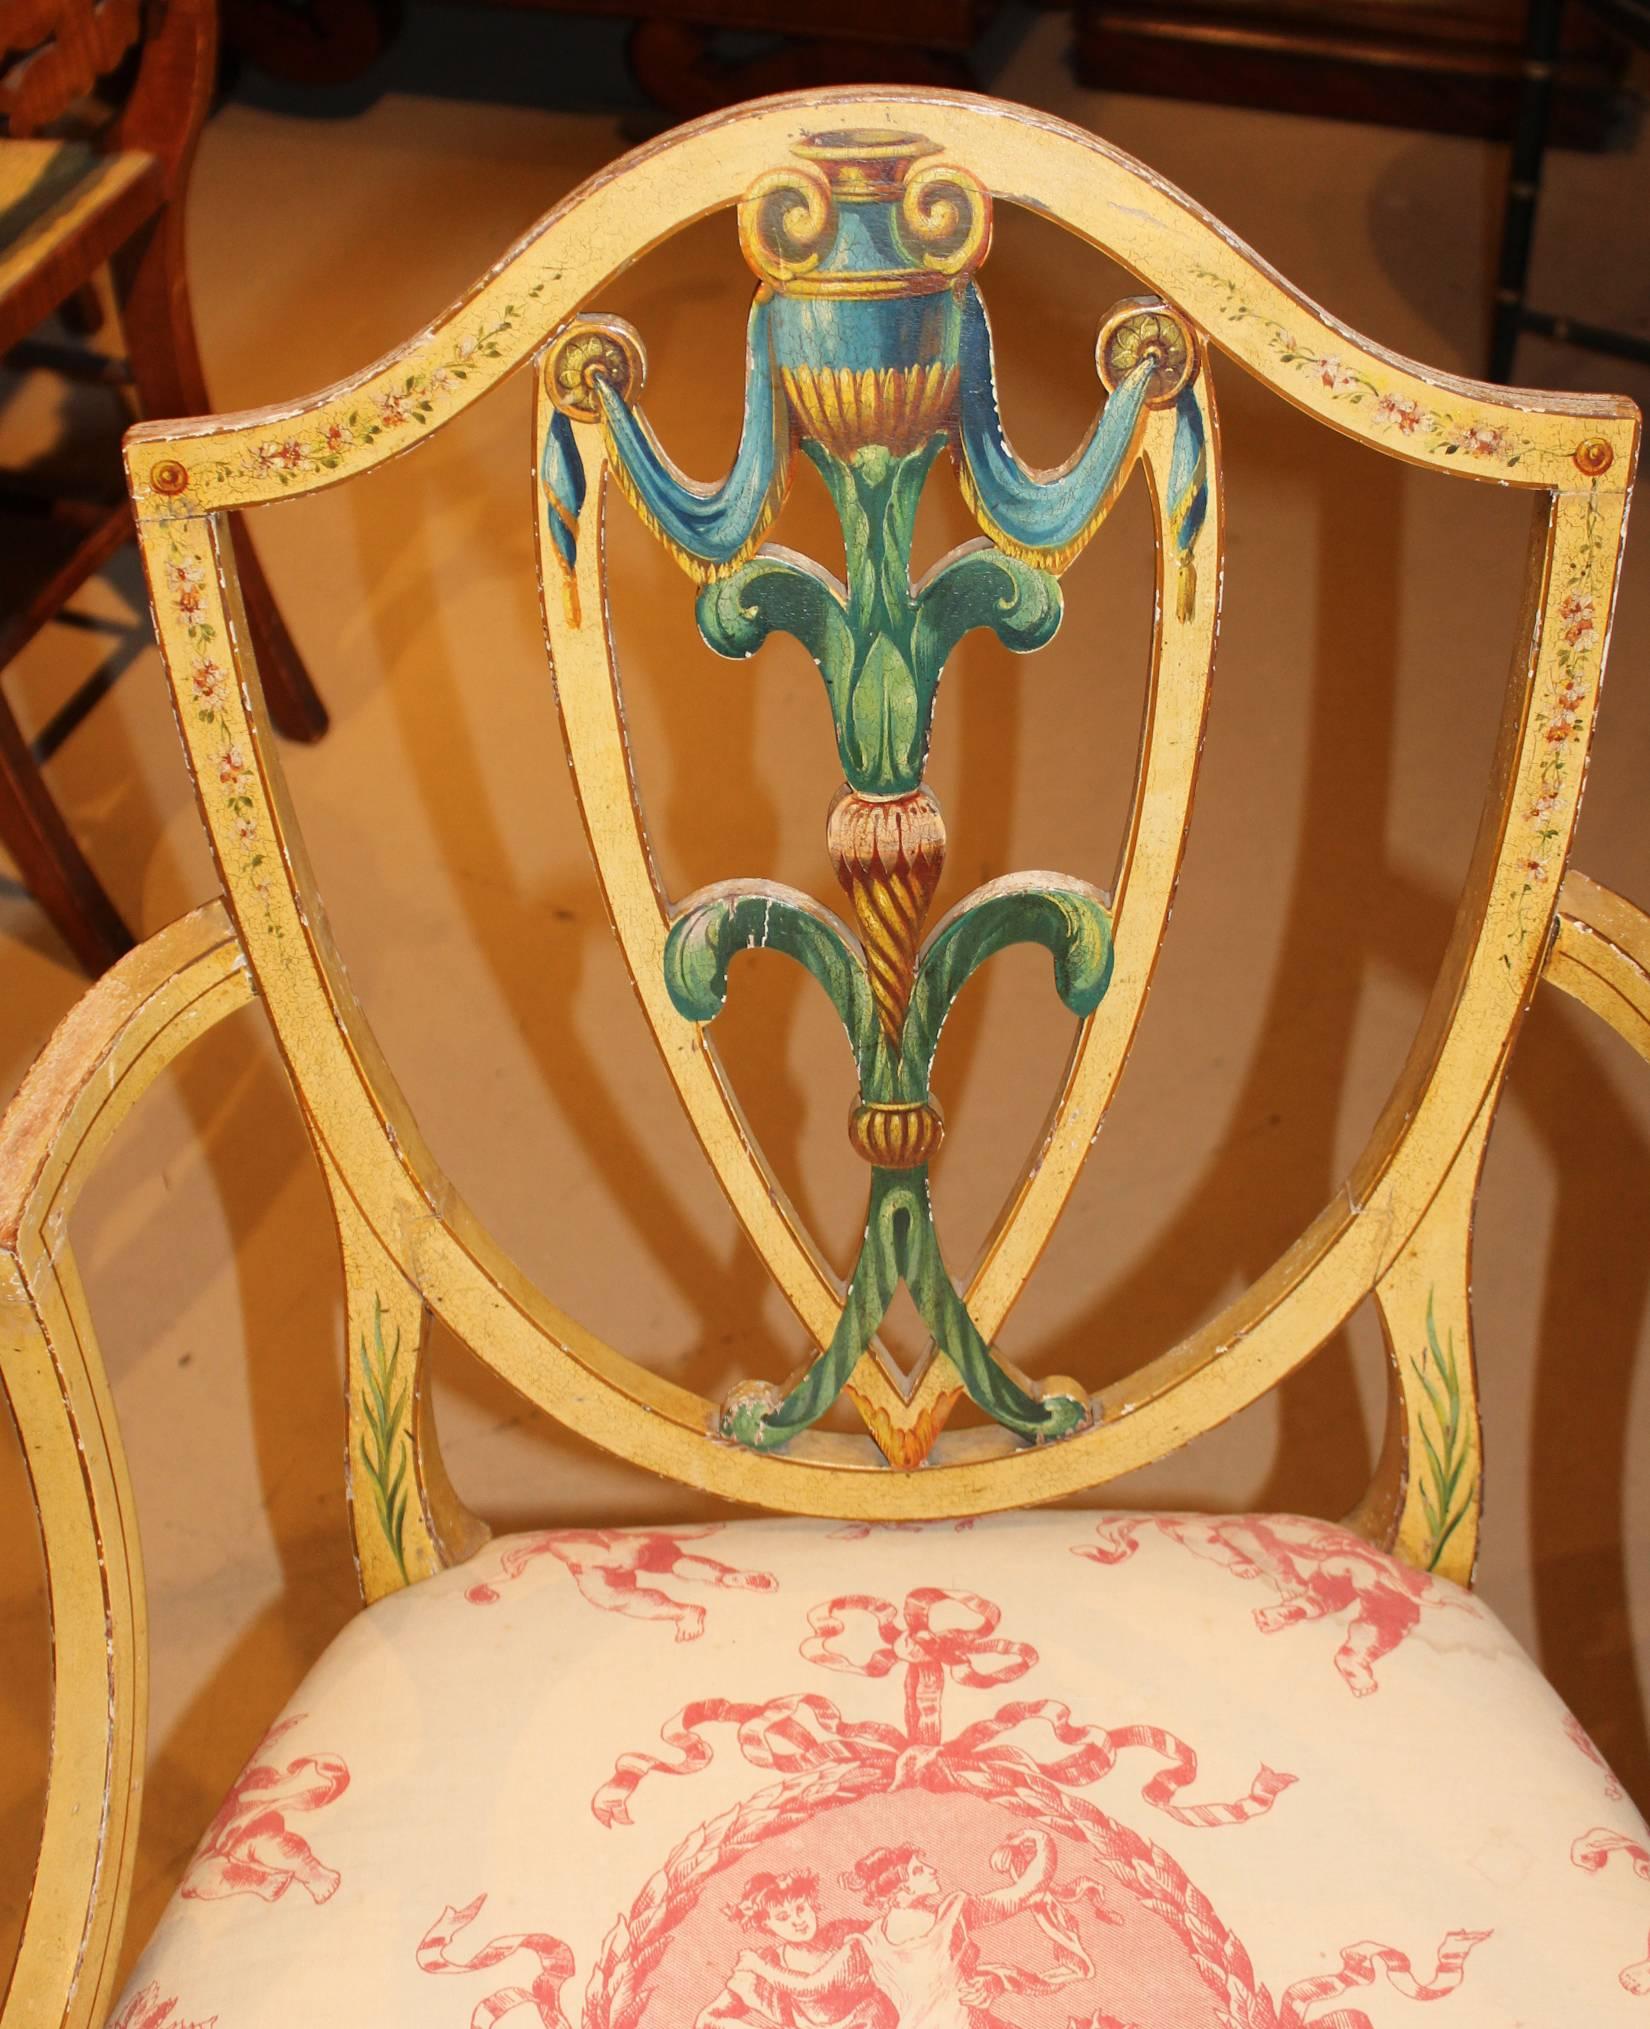 A splendid pair of English Adam Style polychrome upholstered armchairs, in original paint, with Prince of Wales feathers and a Classical urn decoration, in the Sheraton taste. Upholstered in red and white and supported by delicately turned tapered